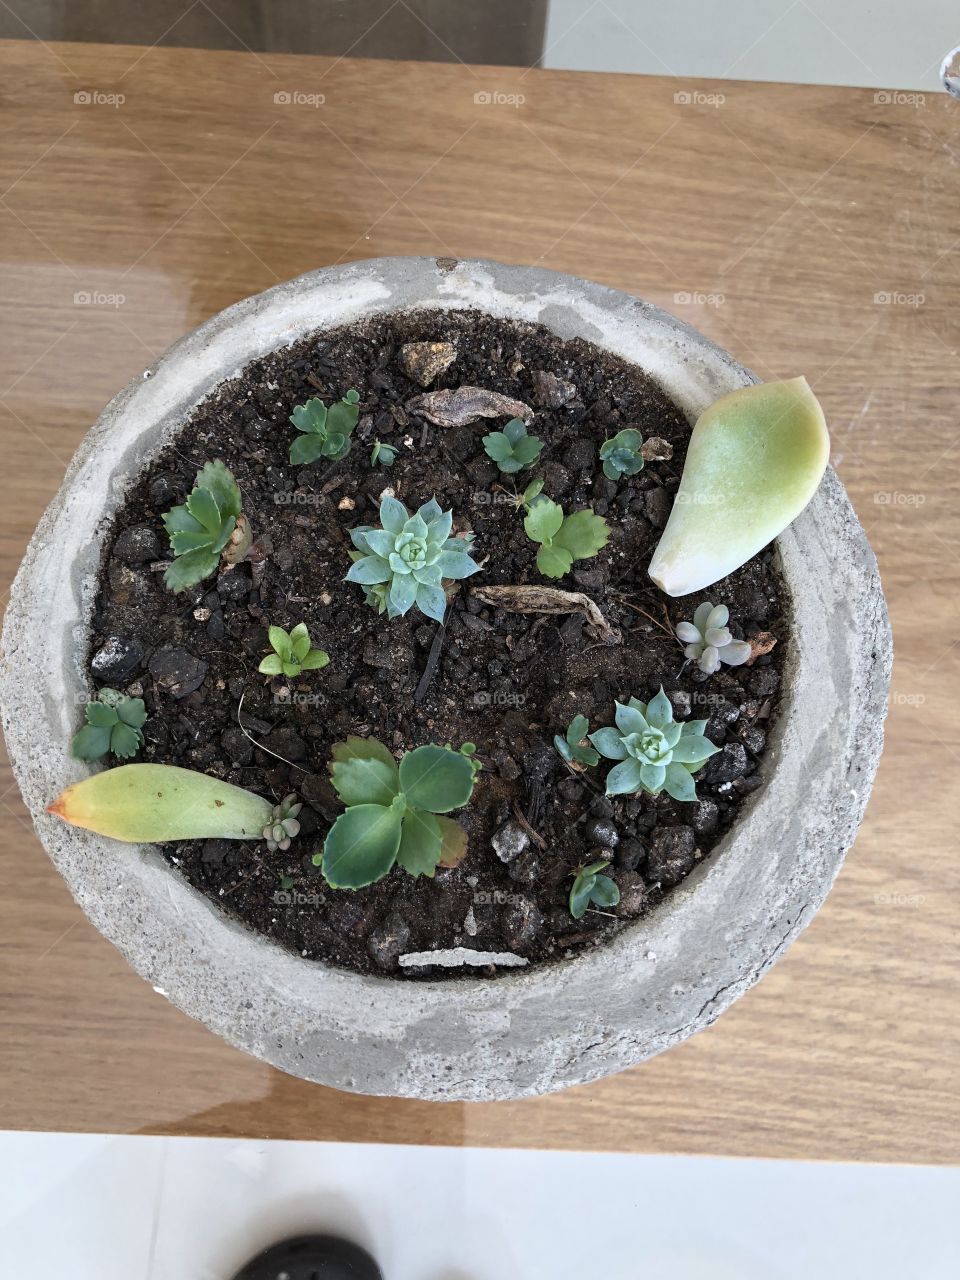 Several succulent plants growing in a cement pot